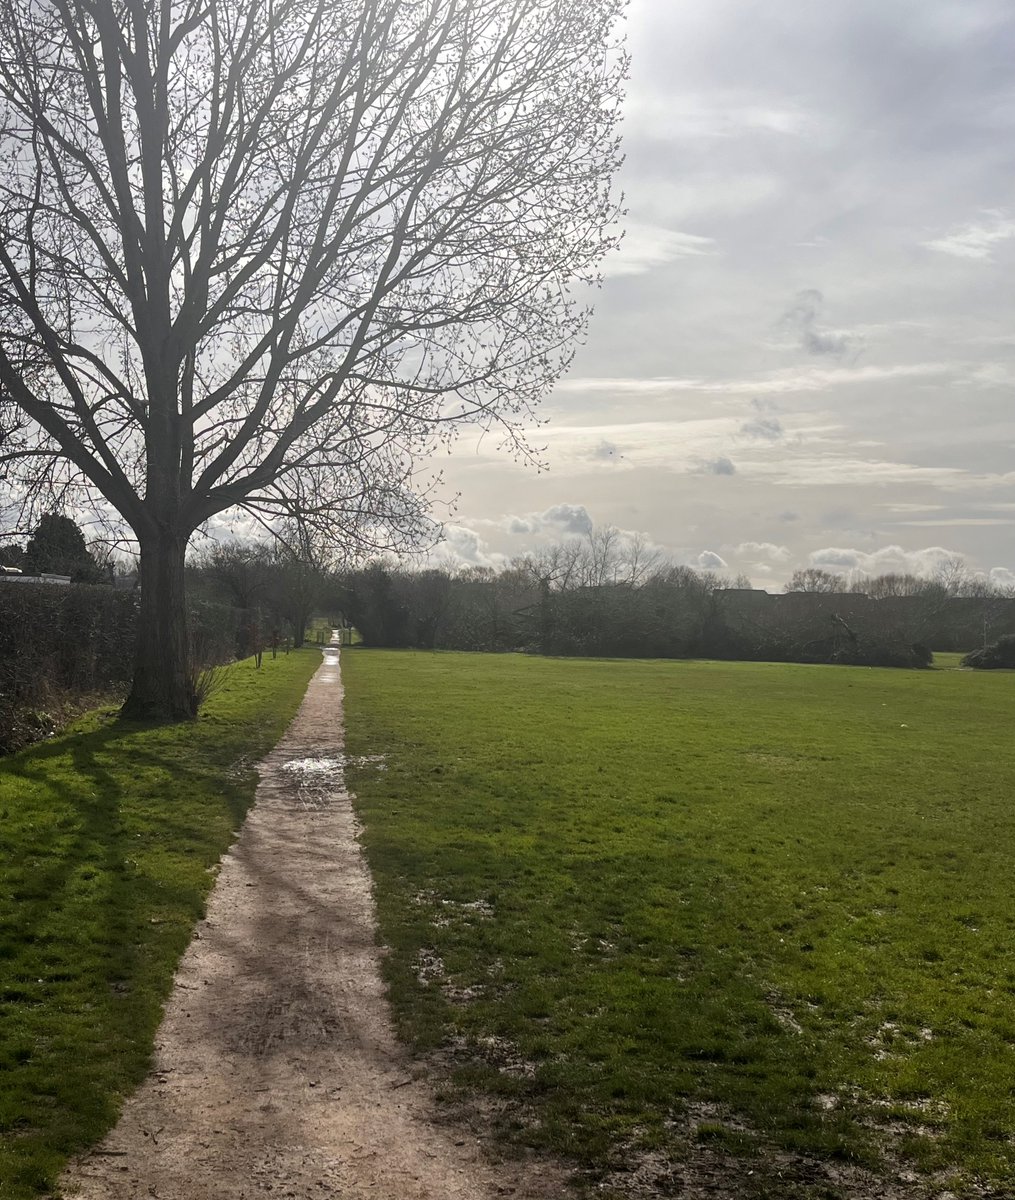 Ruislip Manor Officers carried out Reassurance patrols and a weapon sweep in Jim O'Neiill Walk today #StaySafe #saynotodrugs #saynotoknives #mylocalmet